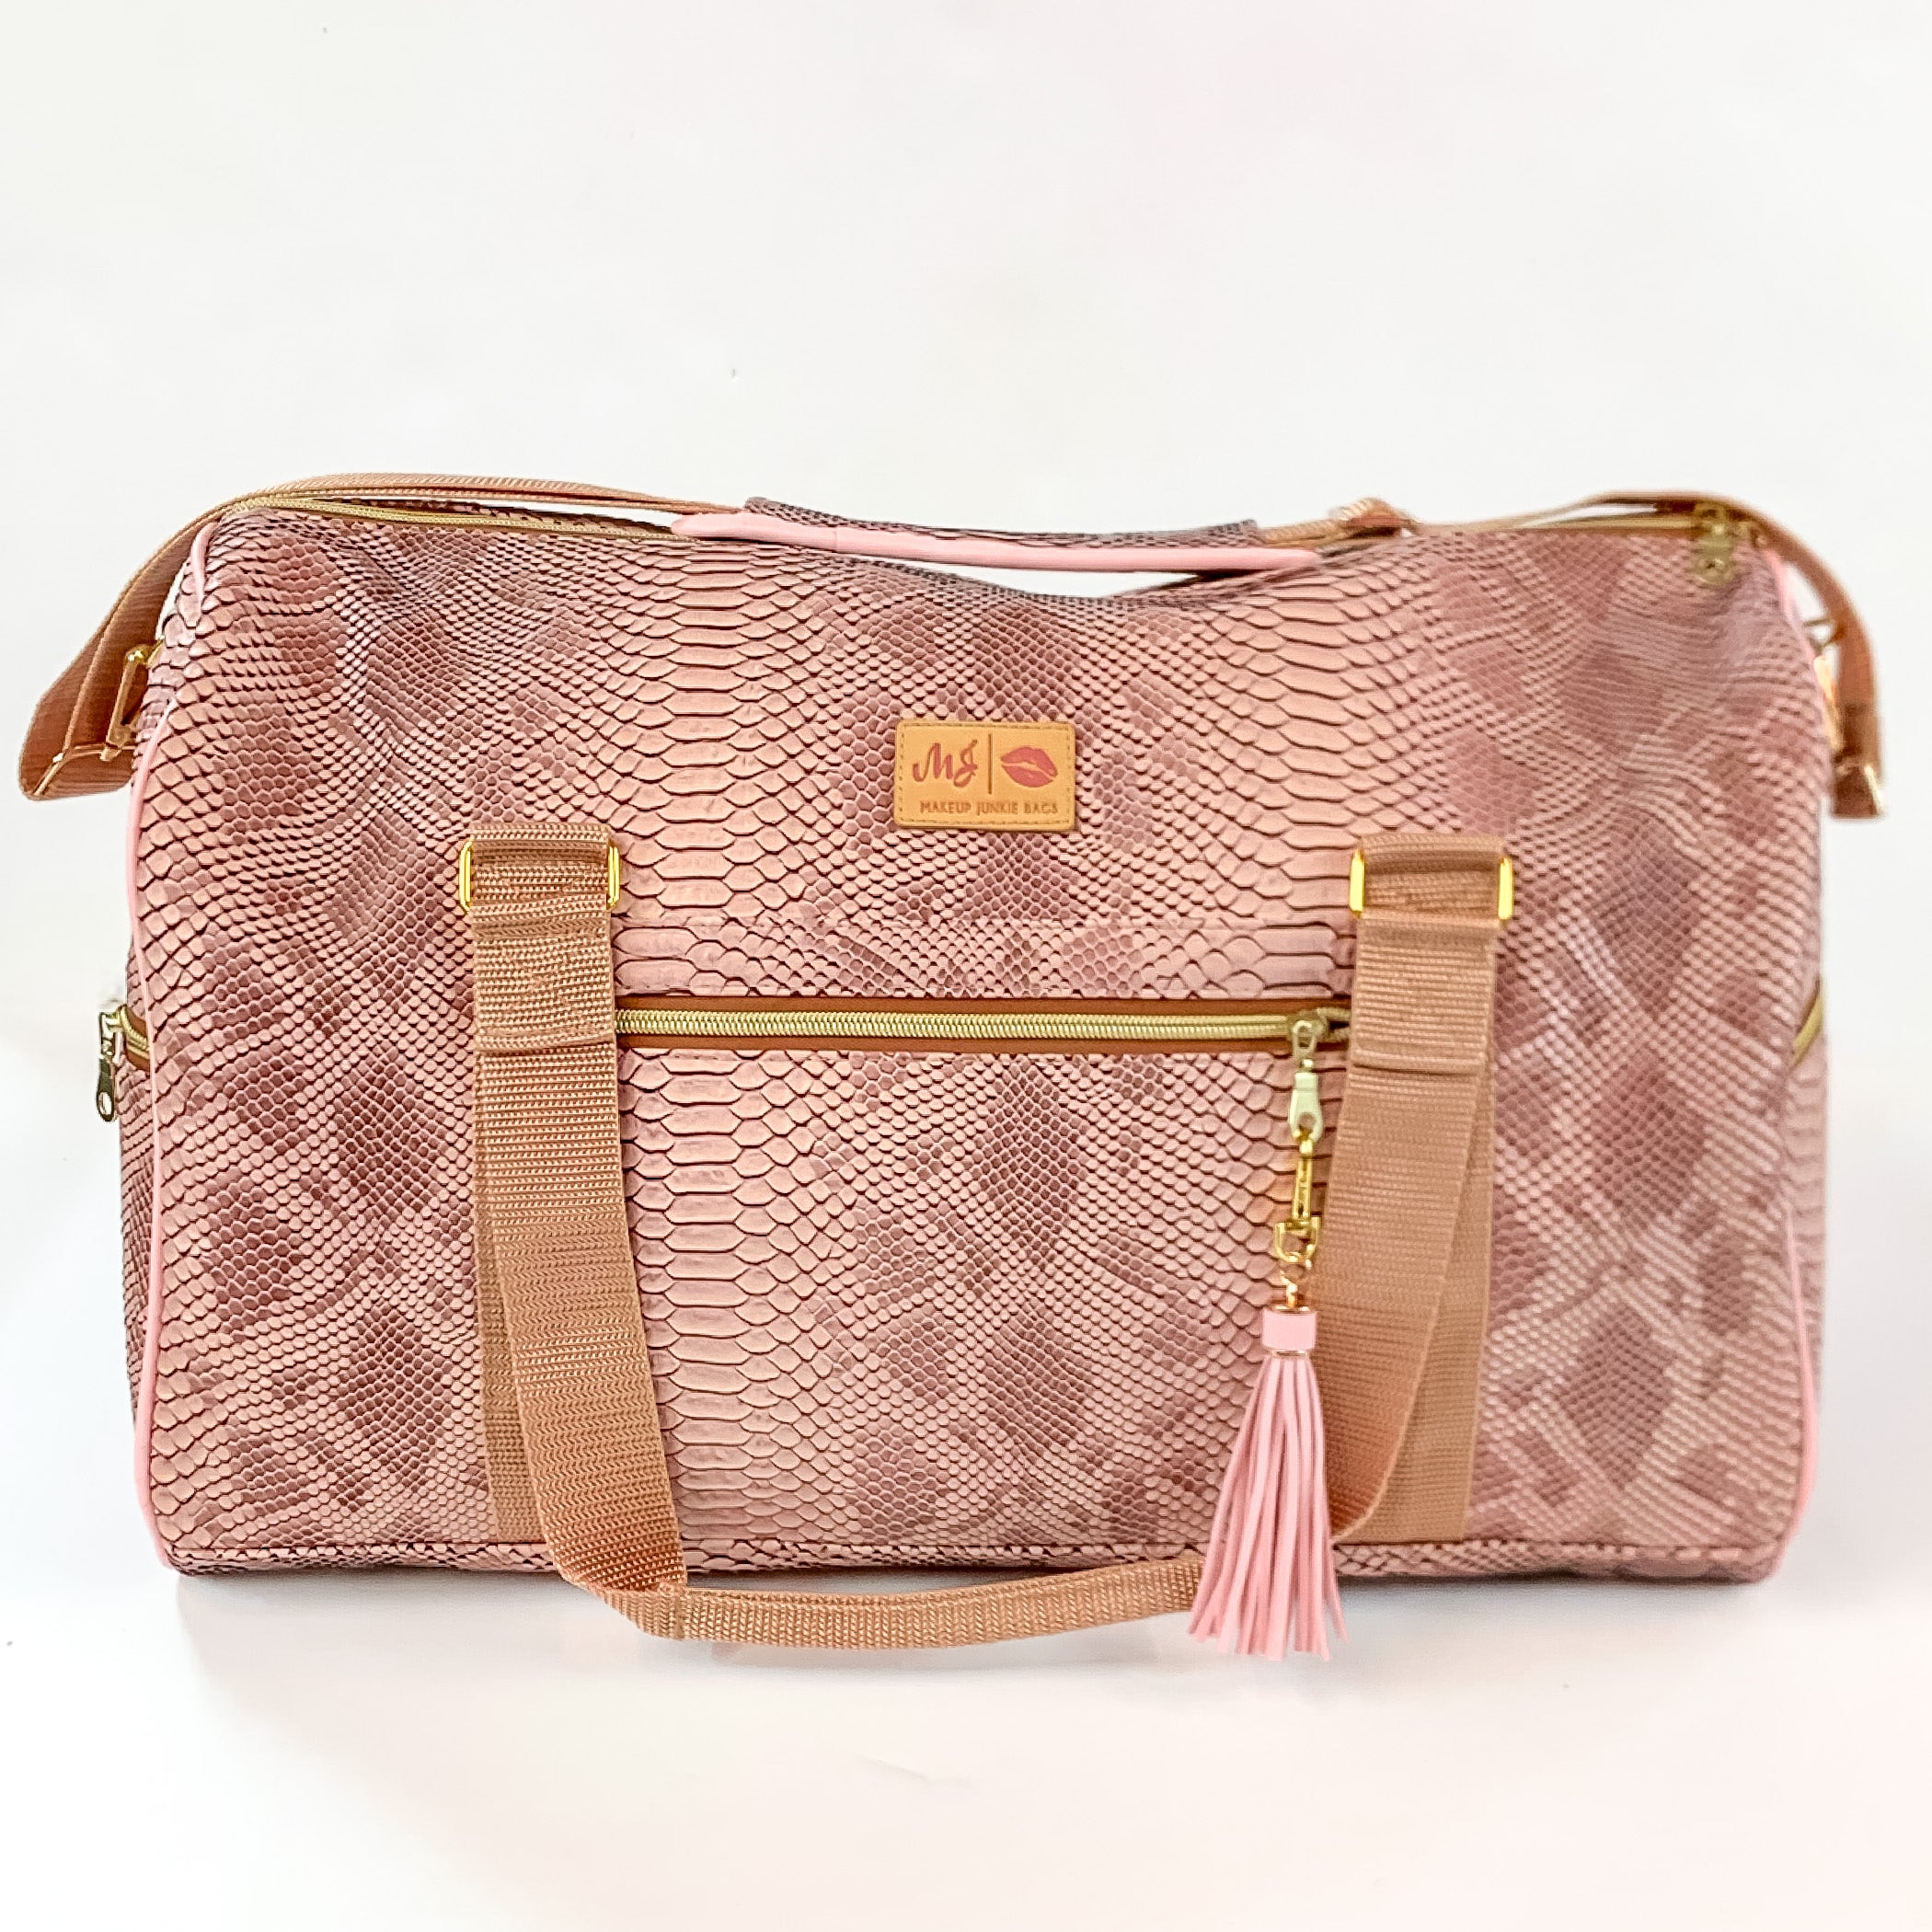 Pictured on a white background is a duffel bag with light tan straps in a copper snake print. This bag includes a zipper tassel, two short light tan straps, and a long light tan strap.